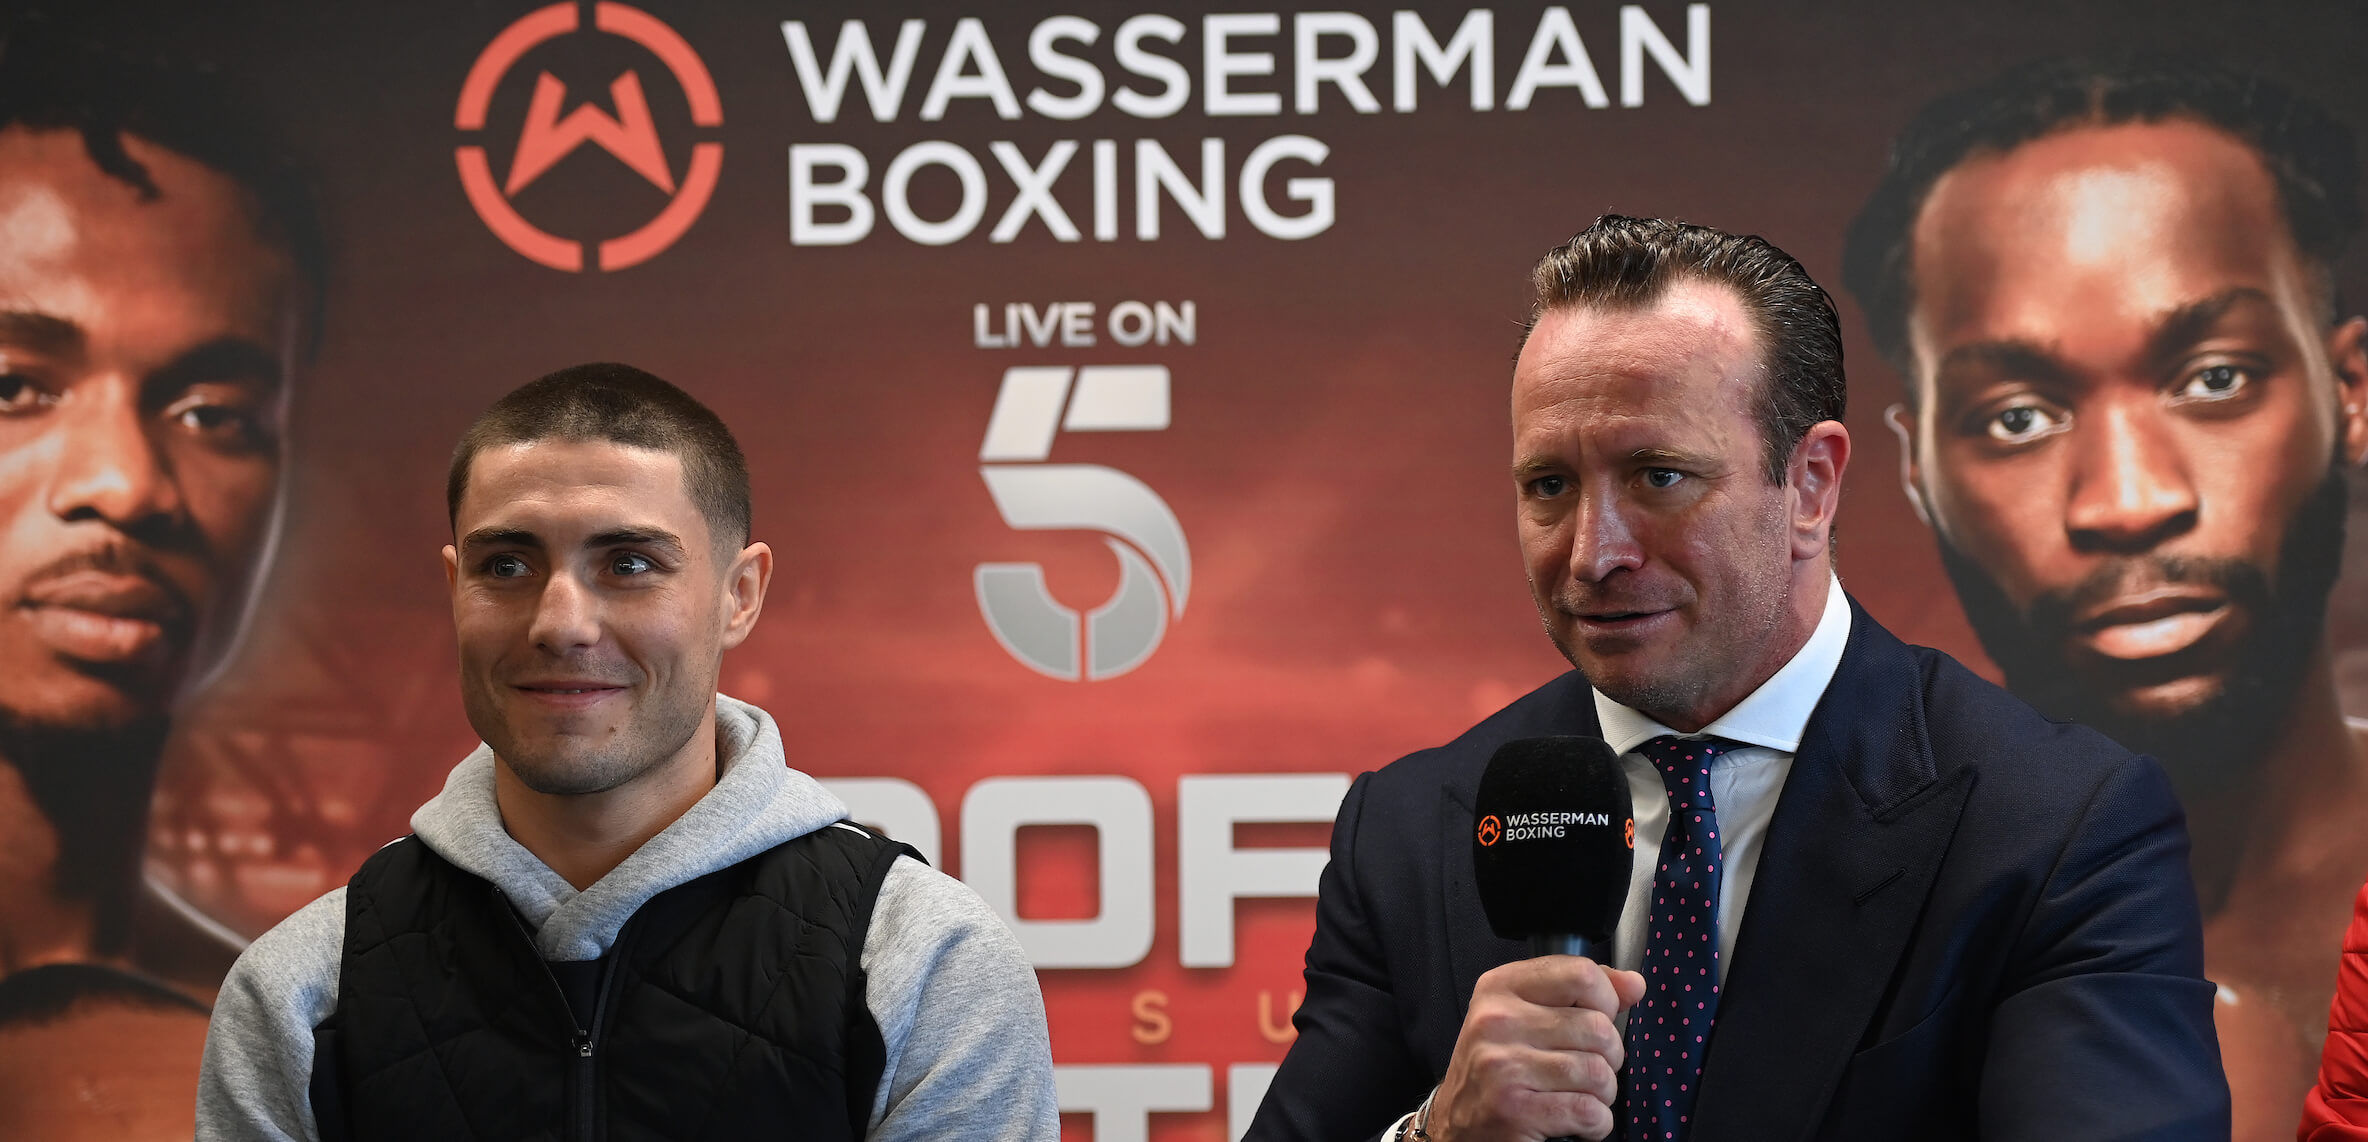 Sauerland: Kelly fell into that vacuum after defeat, he has PPV potential